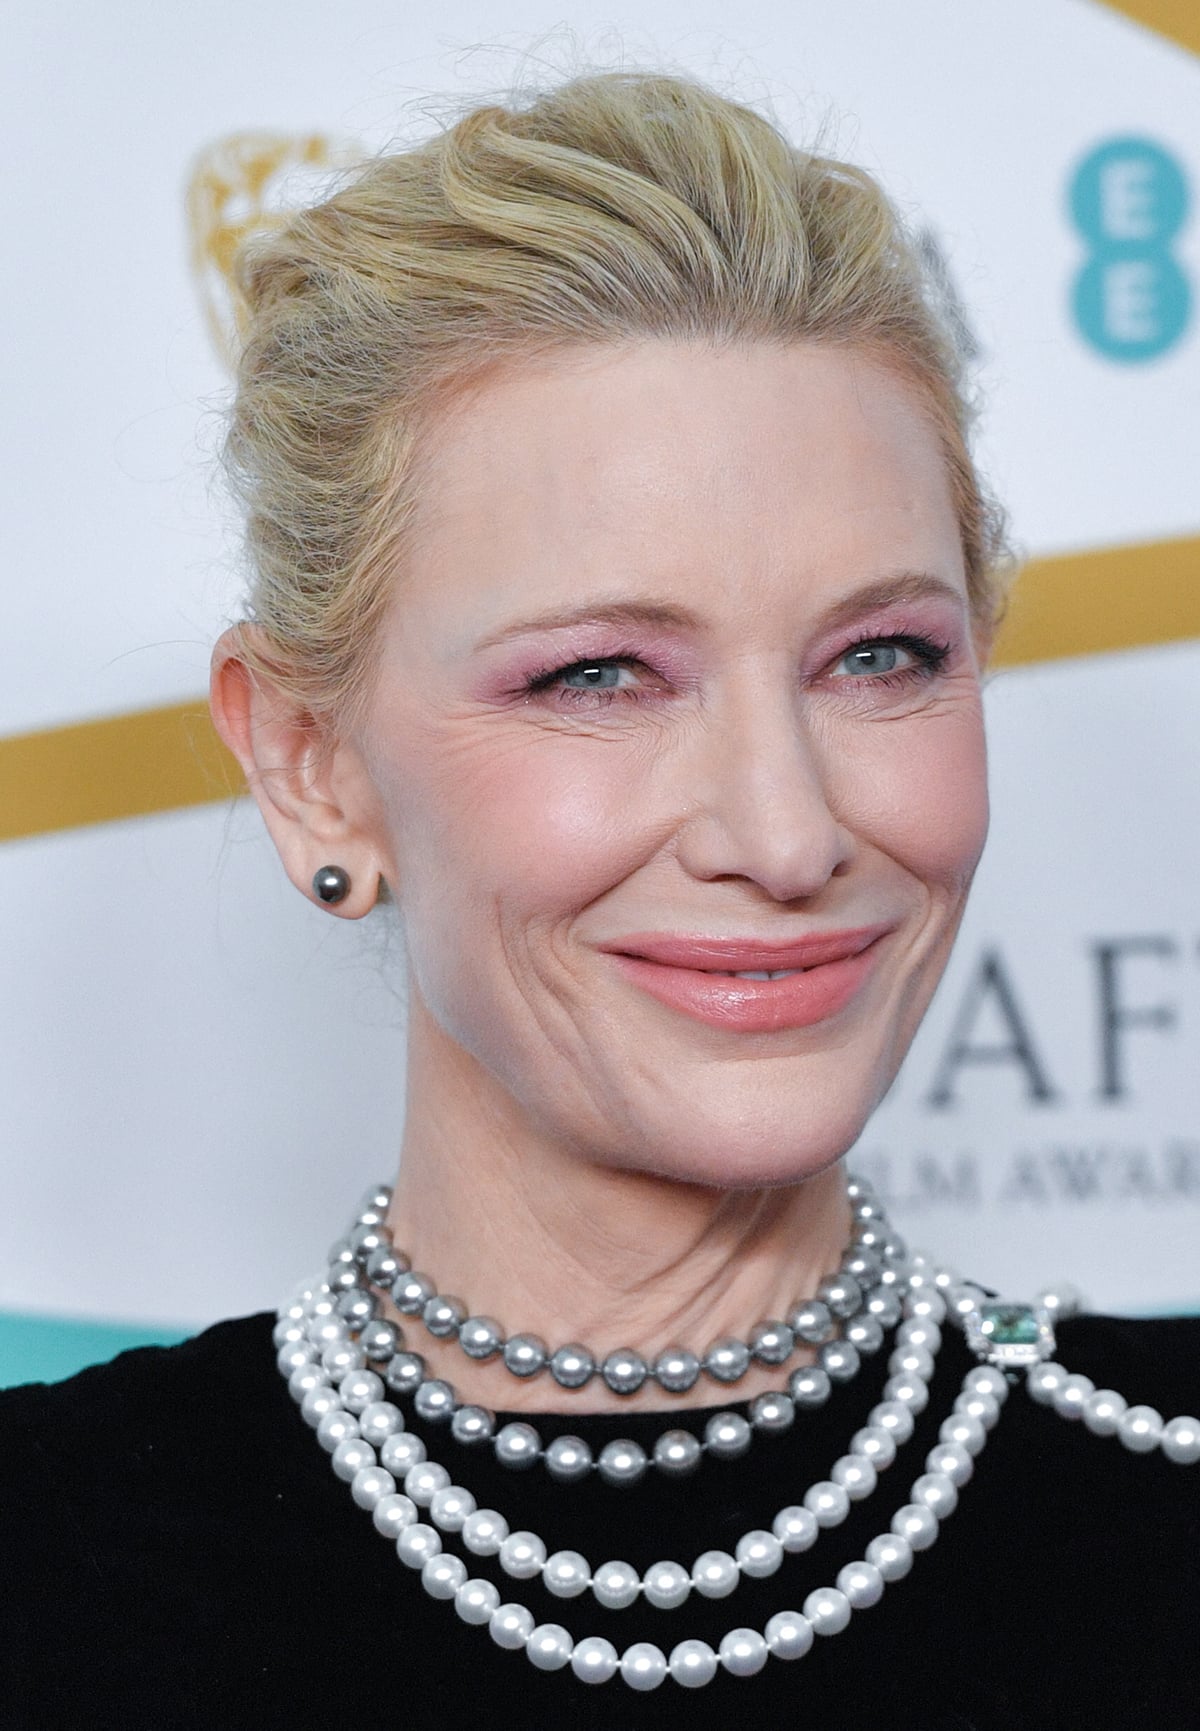 Cate Blanchett wears pink makeup and updates her recycled gown with repurposed Louis Vuitton Tahitian pearl necklace